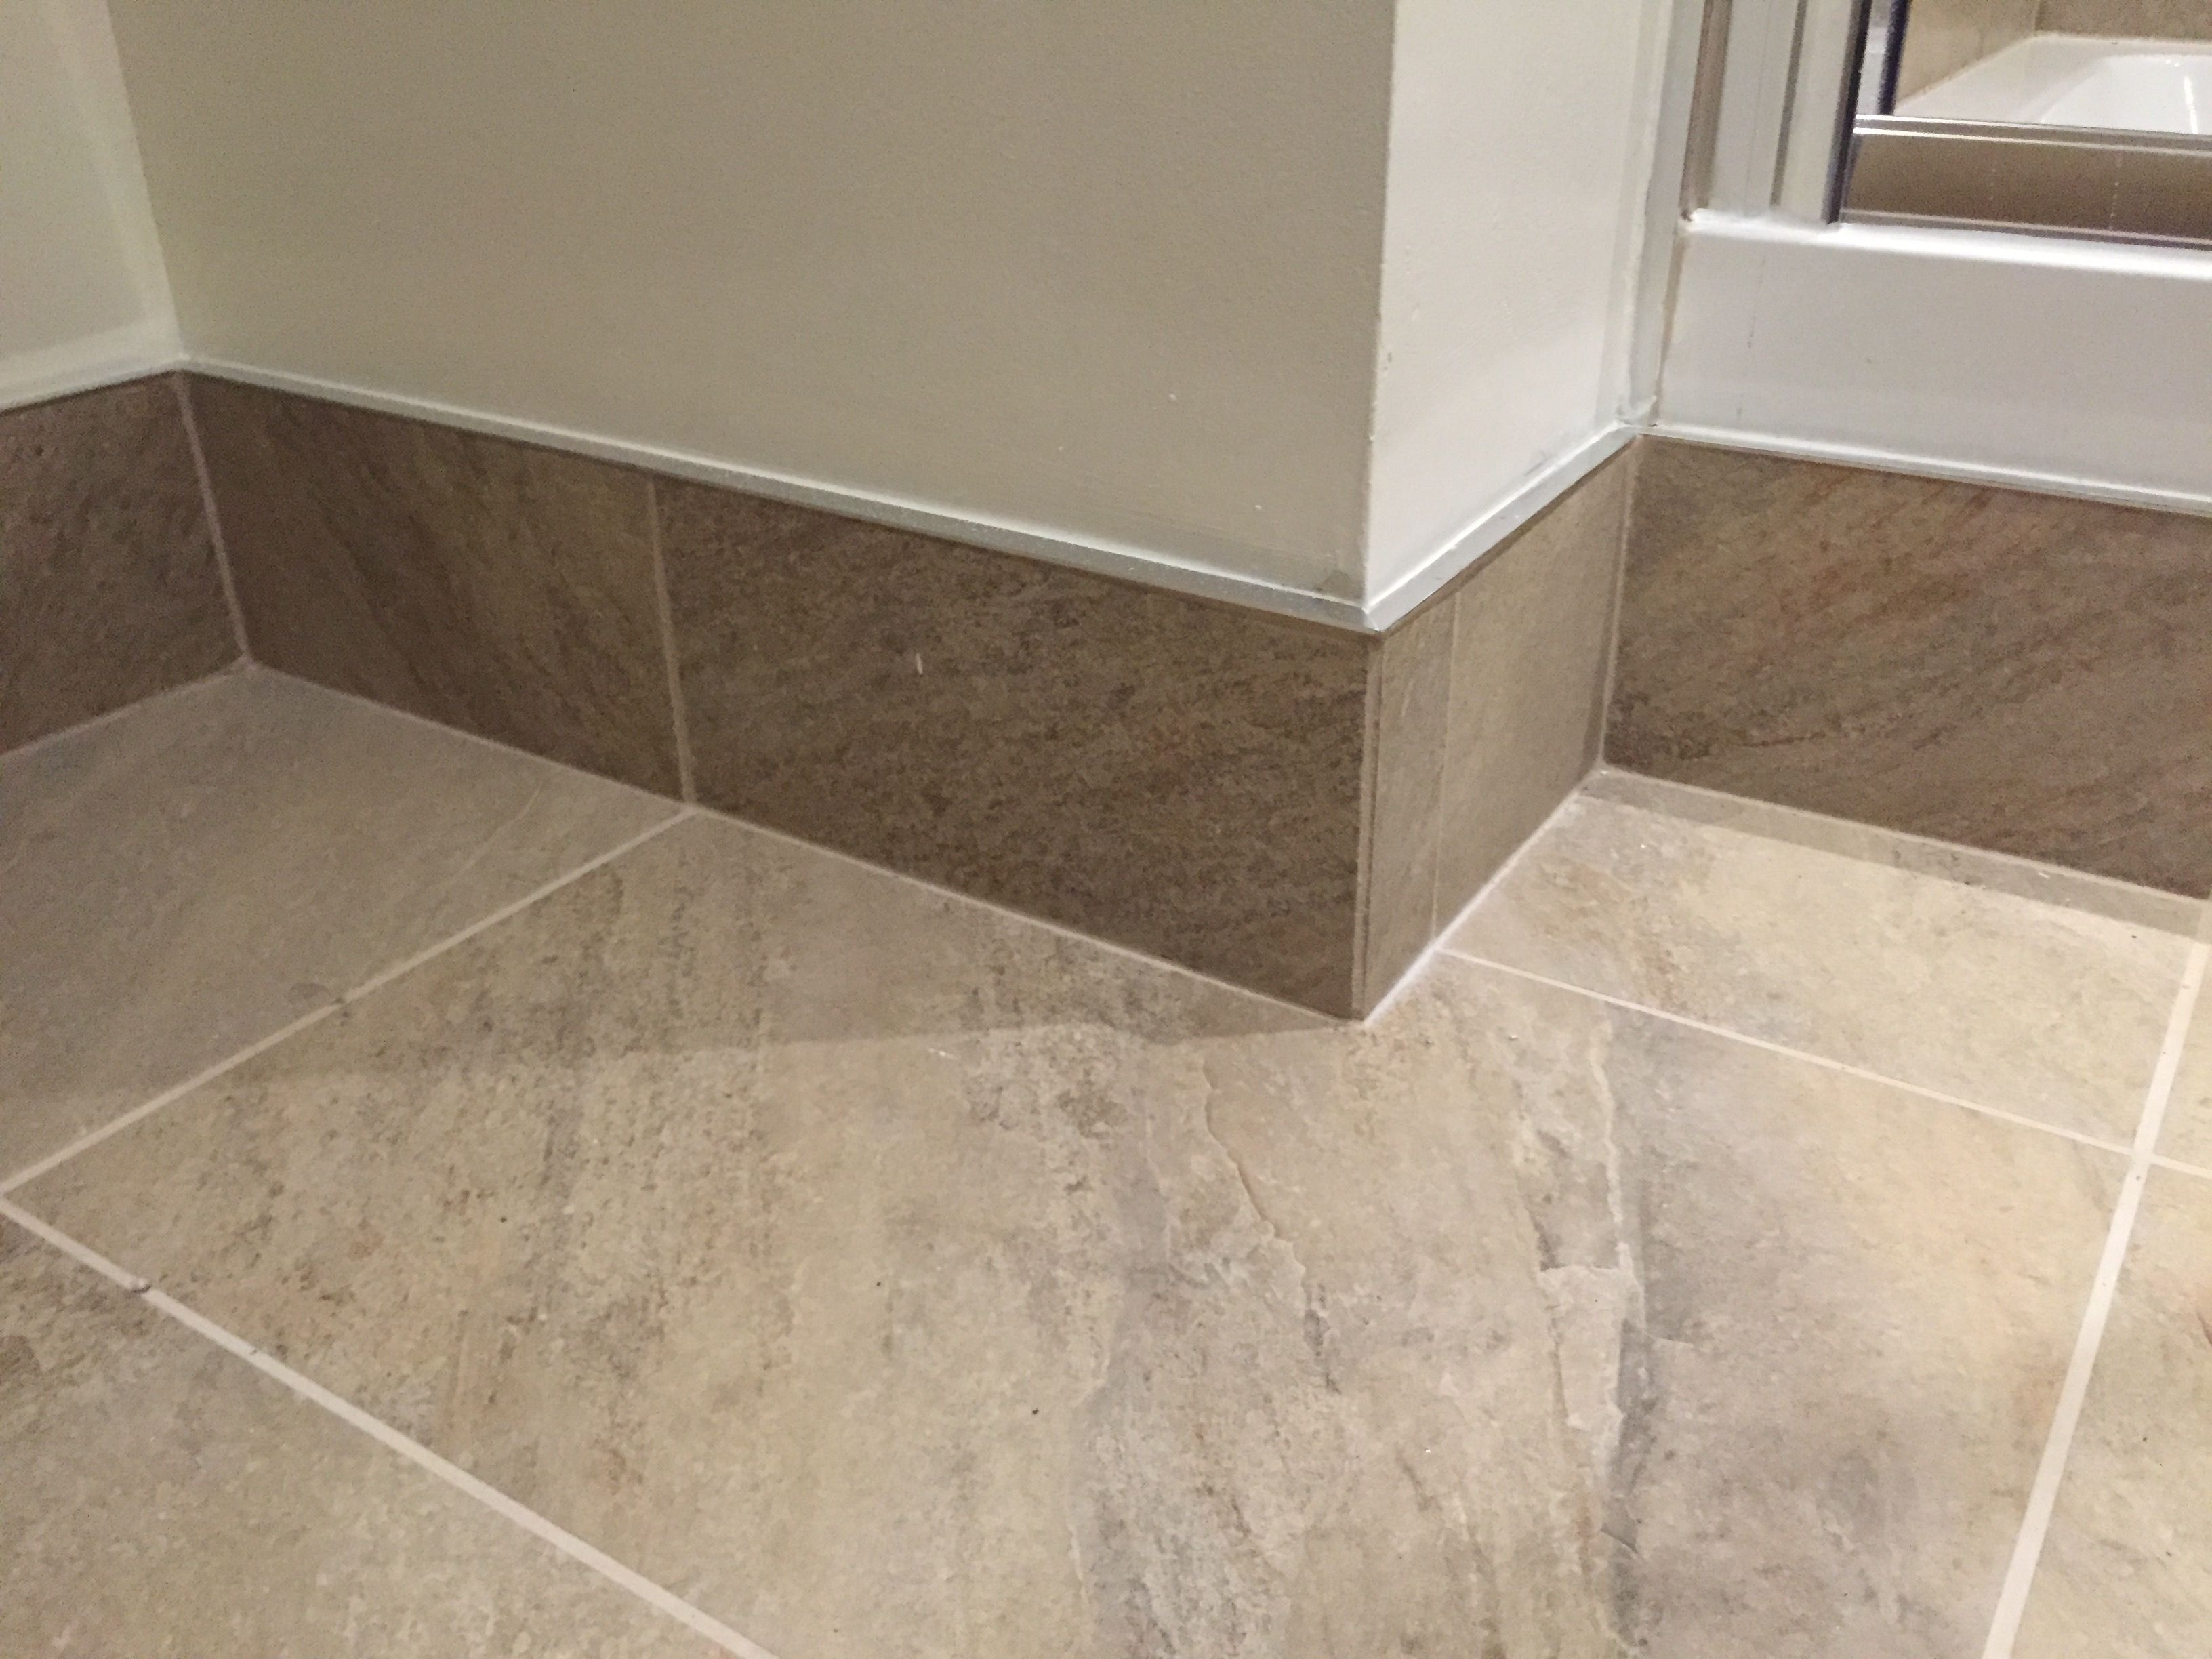 Tiled Skirting Board With Chrome Trim In 2019 Tile throughout sizing 3264 X 2448